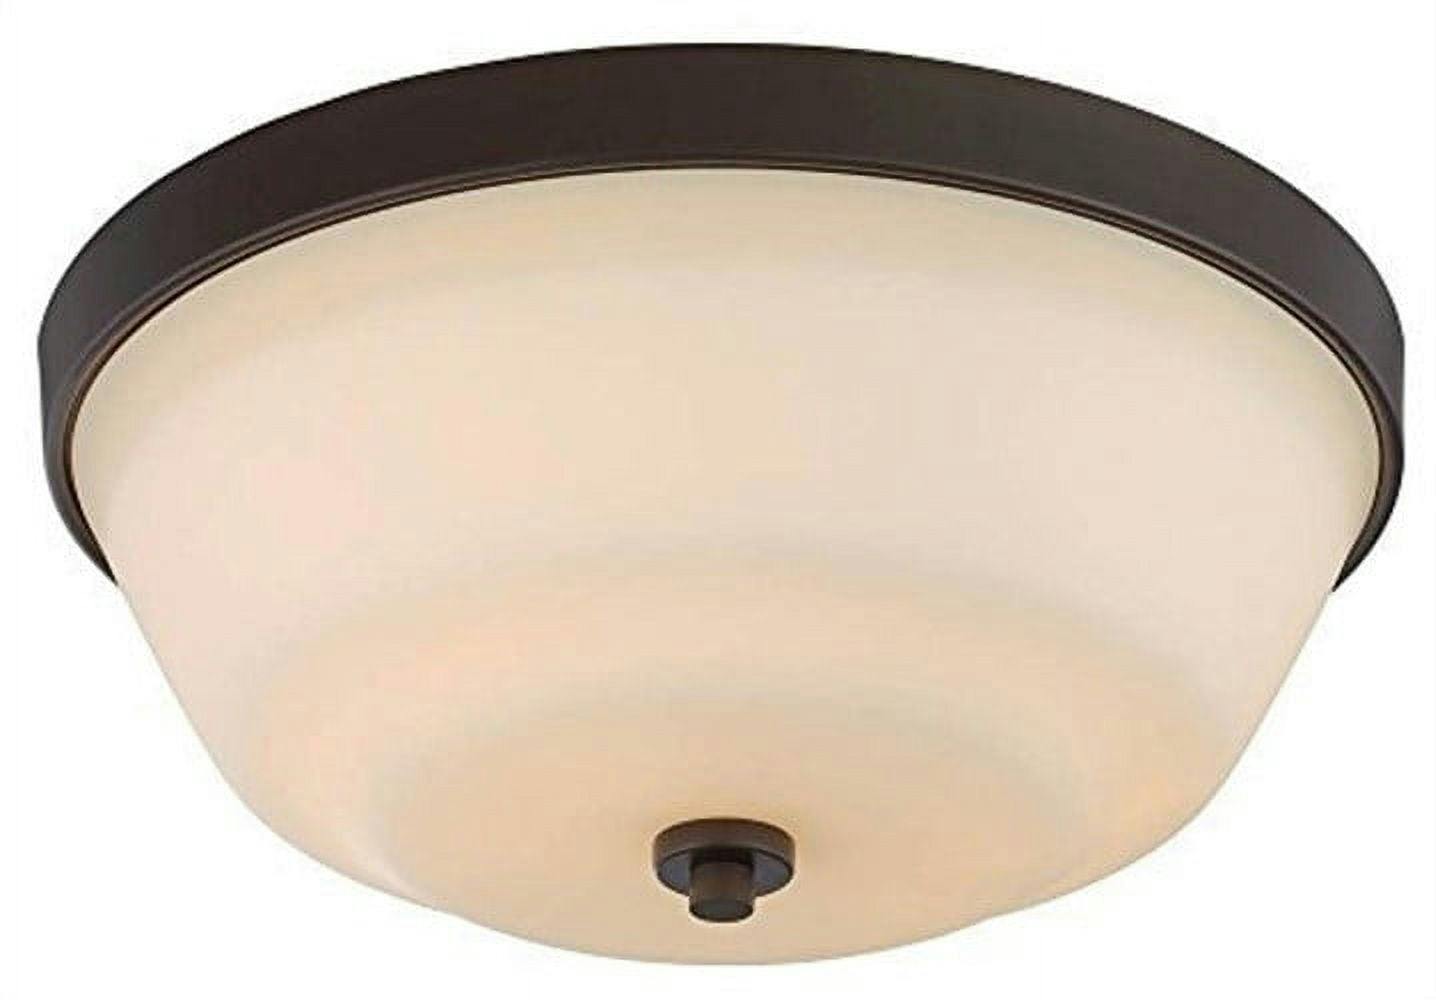 Willow 2-Light Polished Nickel Flush Mount with Satin White Glass